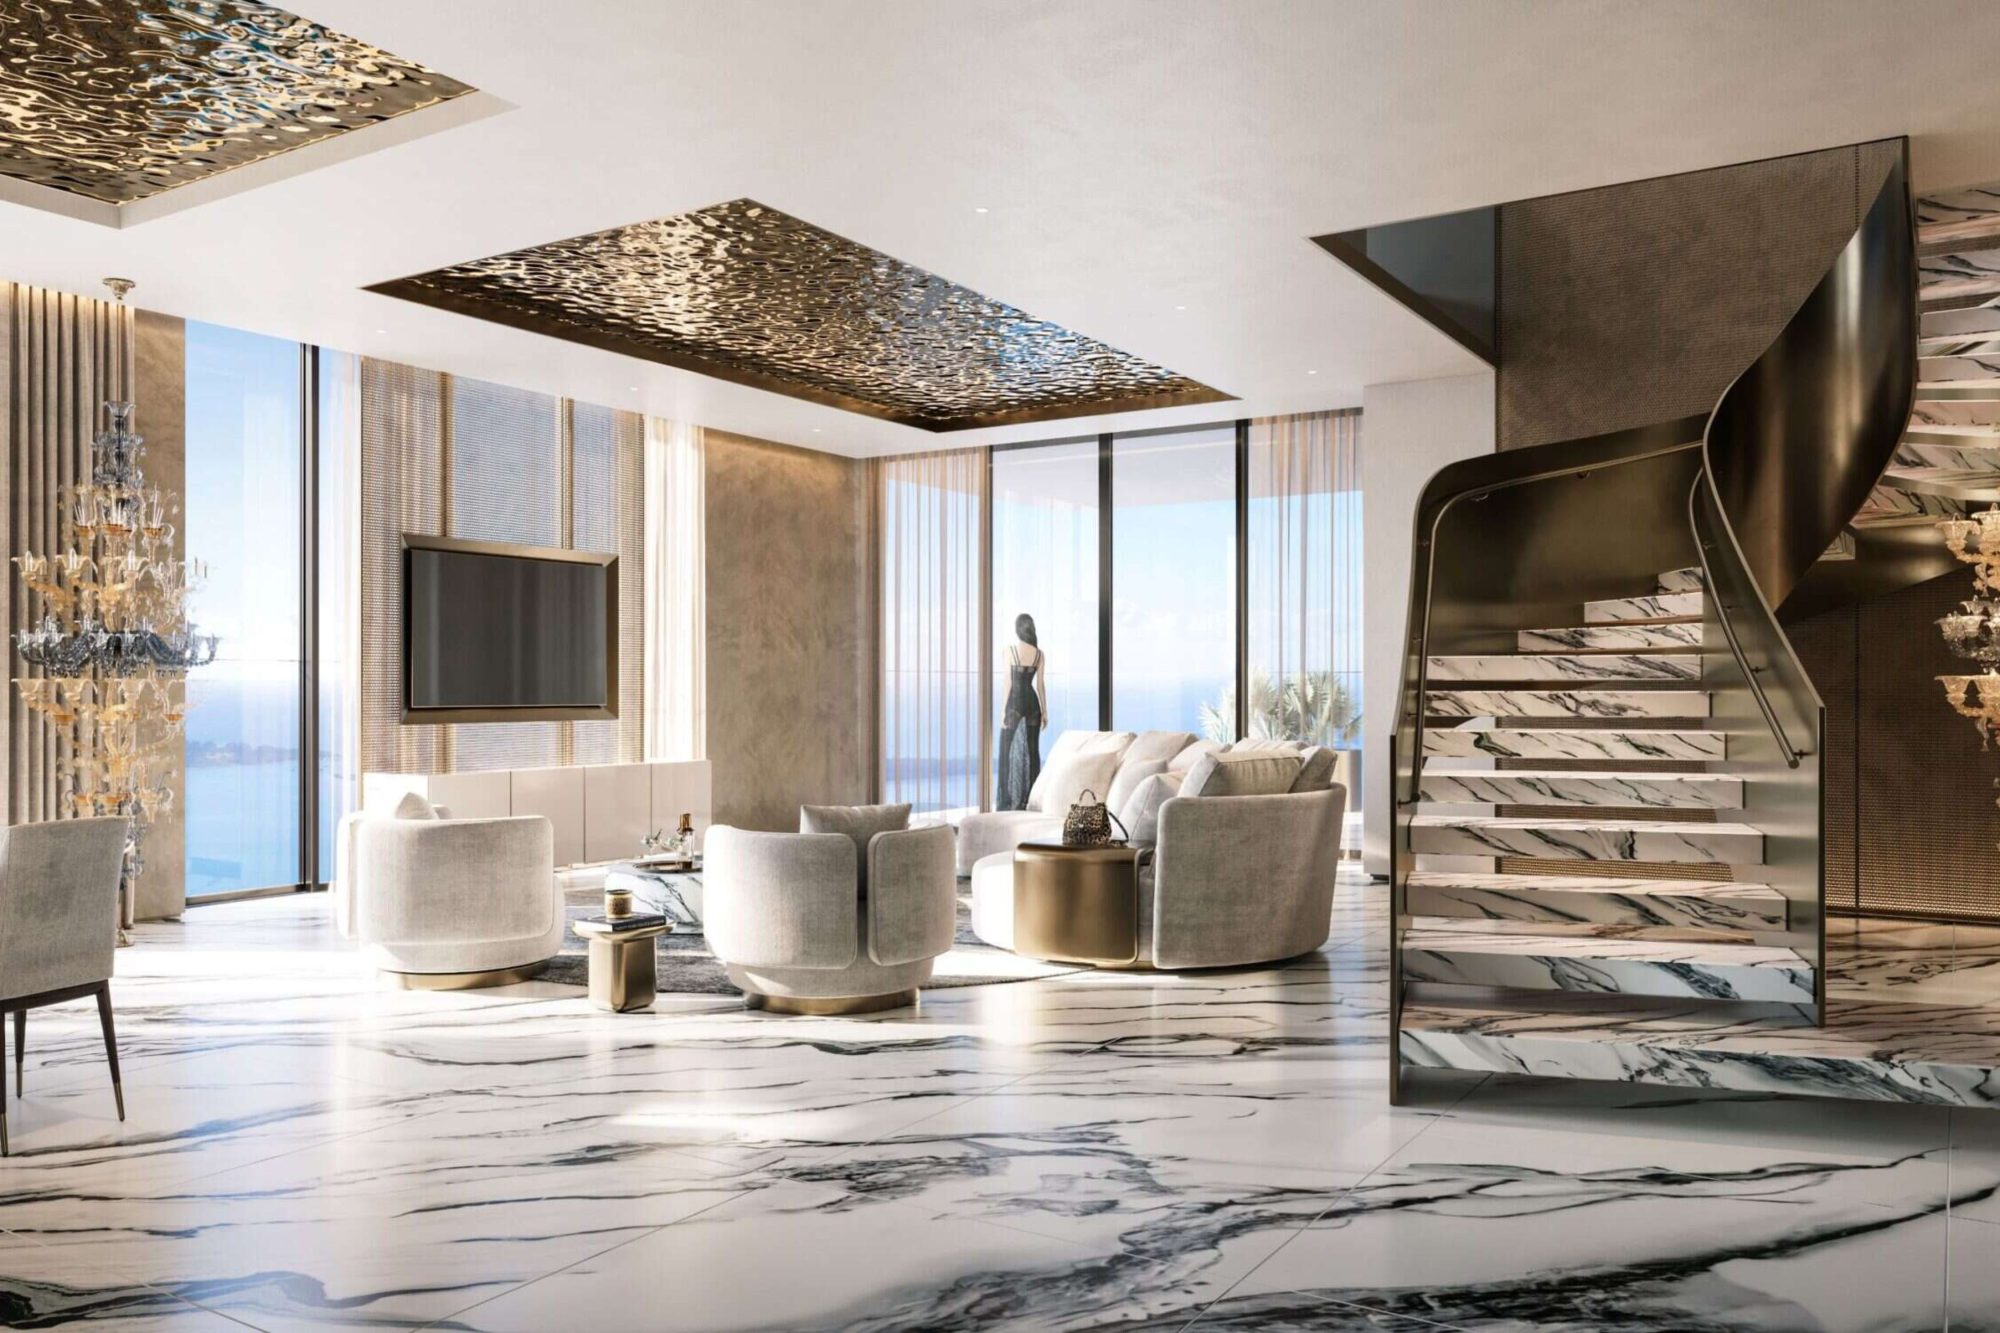 Dolce & Gabbana Residences at 888 Brickell is the epitome of Italian grandeur in Miami